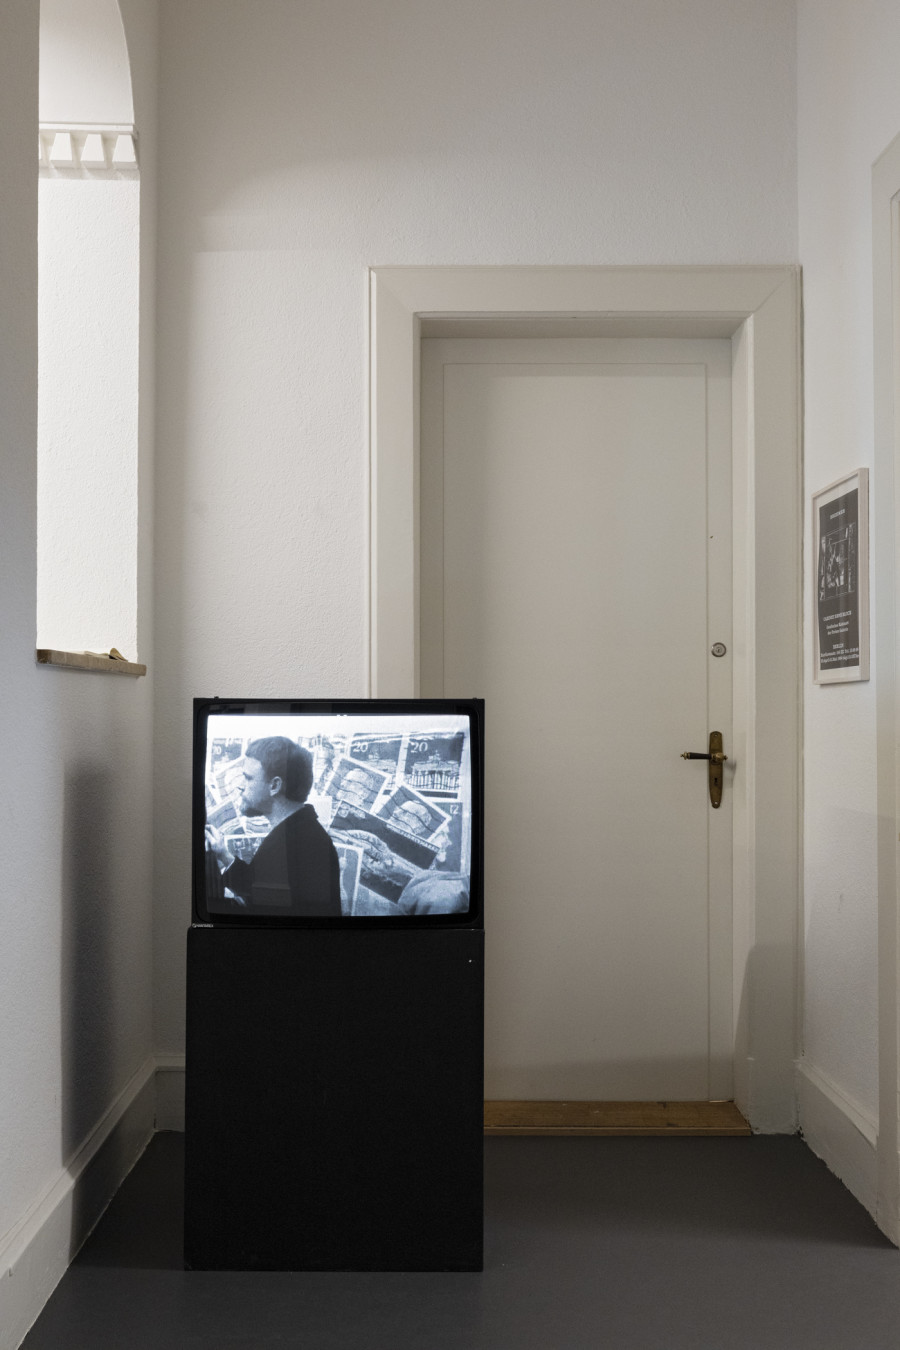 Exhibition view, KP Brehmer, Best, Good, Uncertain, Troubled, Weiss Falk, 2022. Courtesy: Weiss Falk and the Artist.